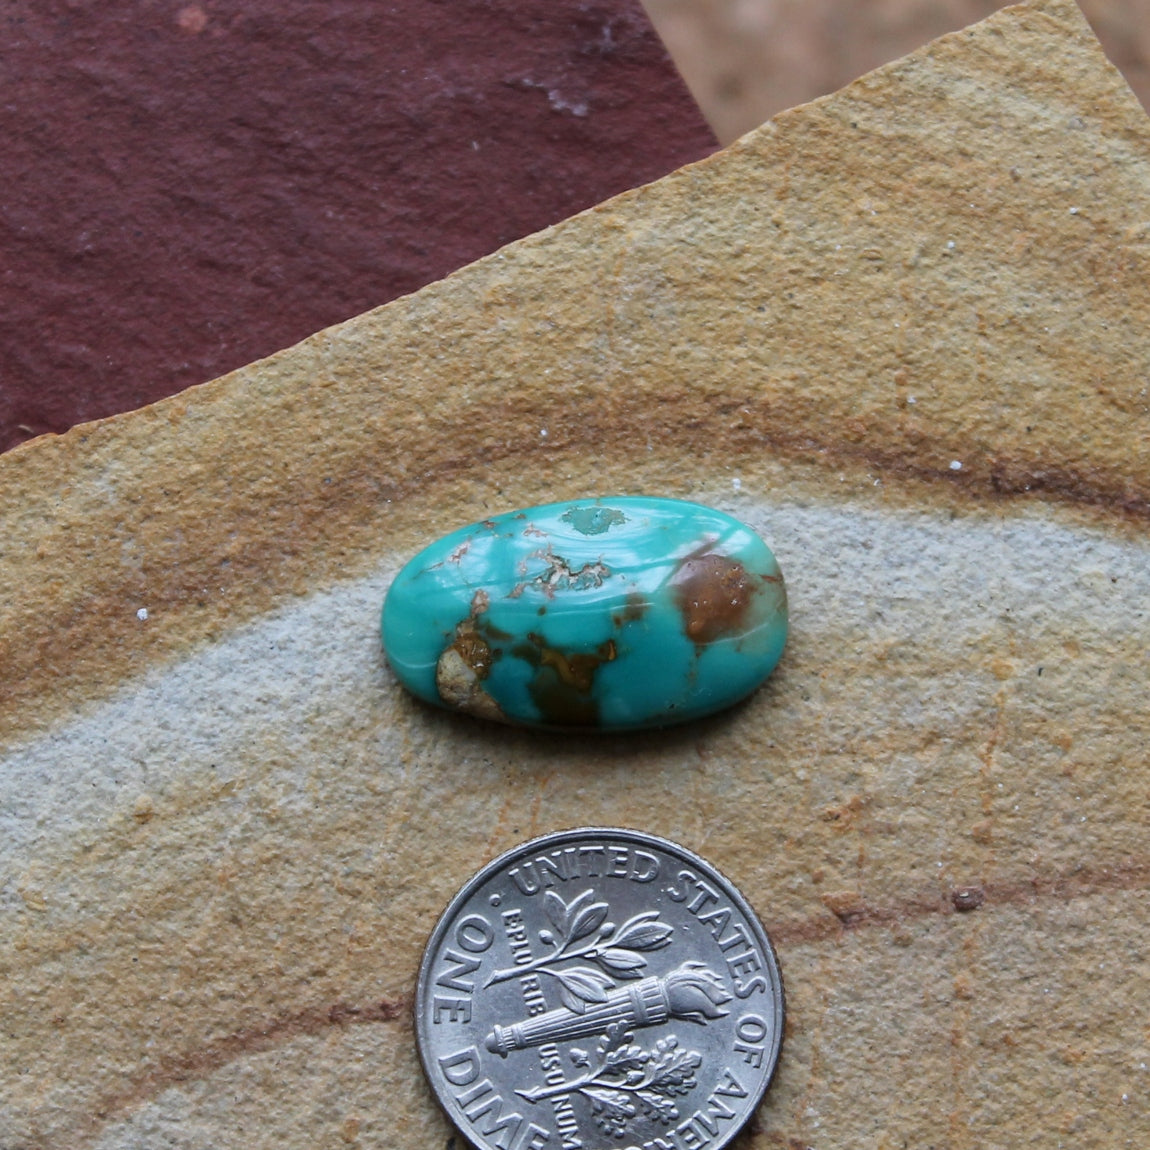 7 carat teal green Stone Mountain Turquoise cabochon with a red inclusions